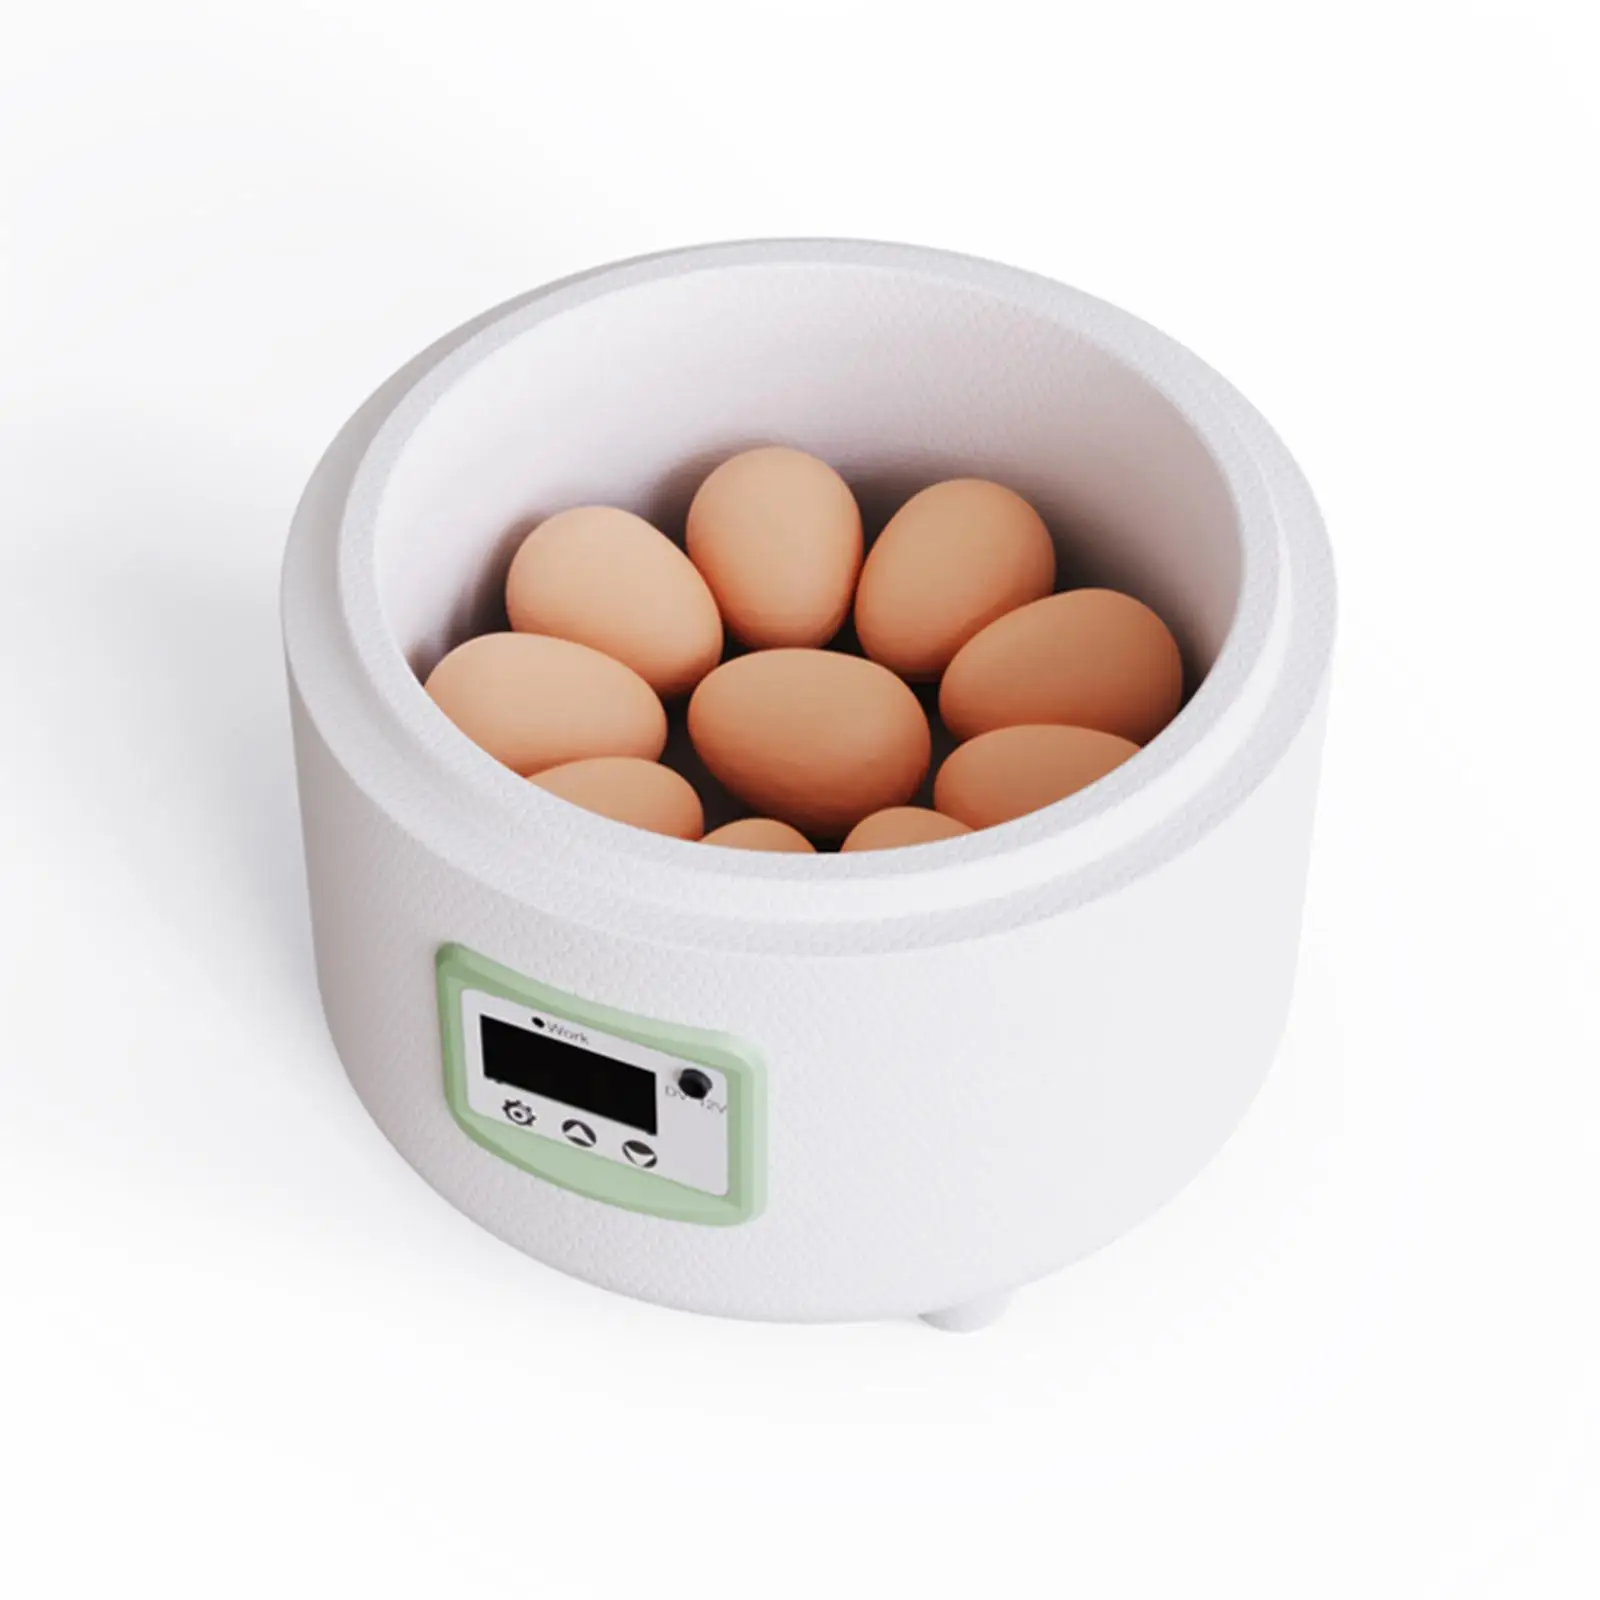 Portable Digital Automatic Egg Incubator Dual Power Small Poultry Hatcher for Hatching Parakeet Turkey Eggs Duck